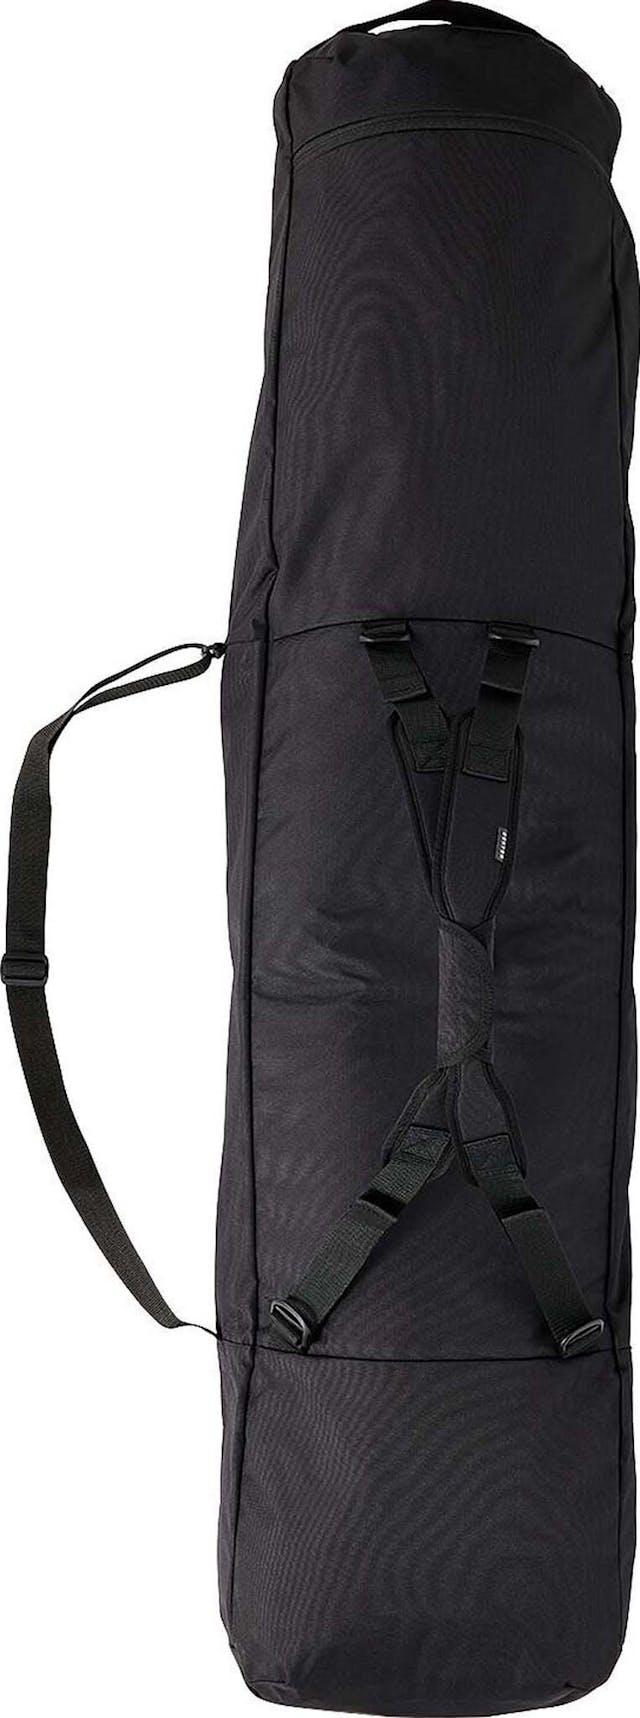 Product image for Commuter Space Sack Snowboard Bag 90L